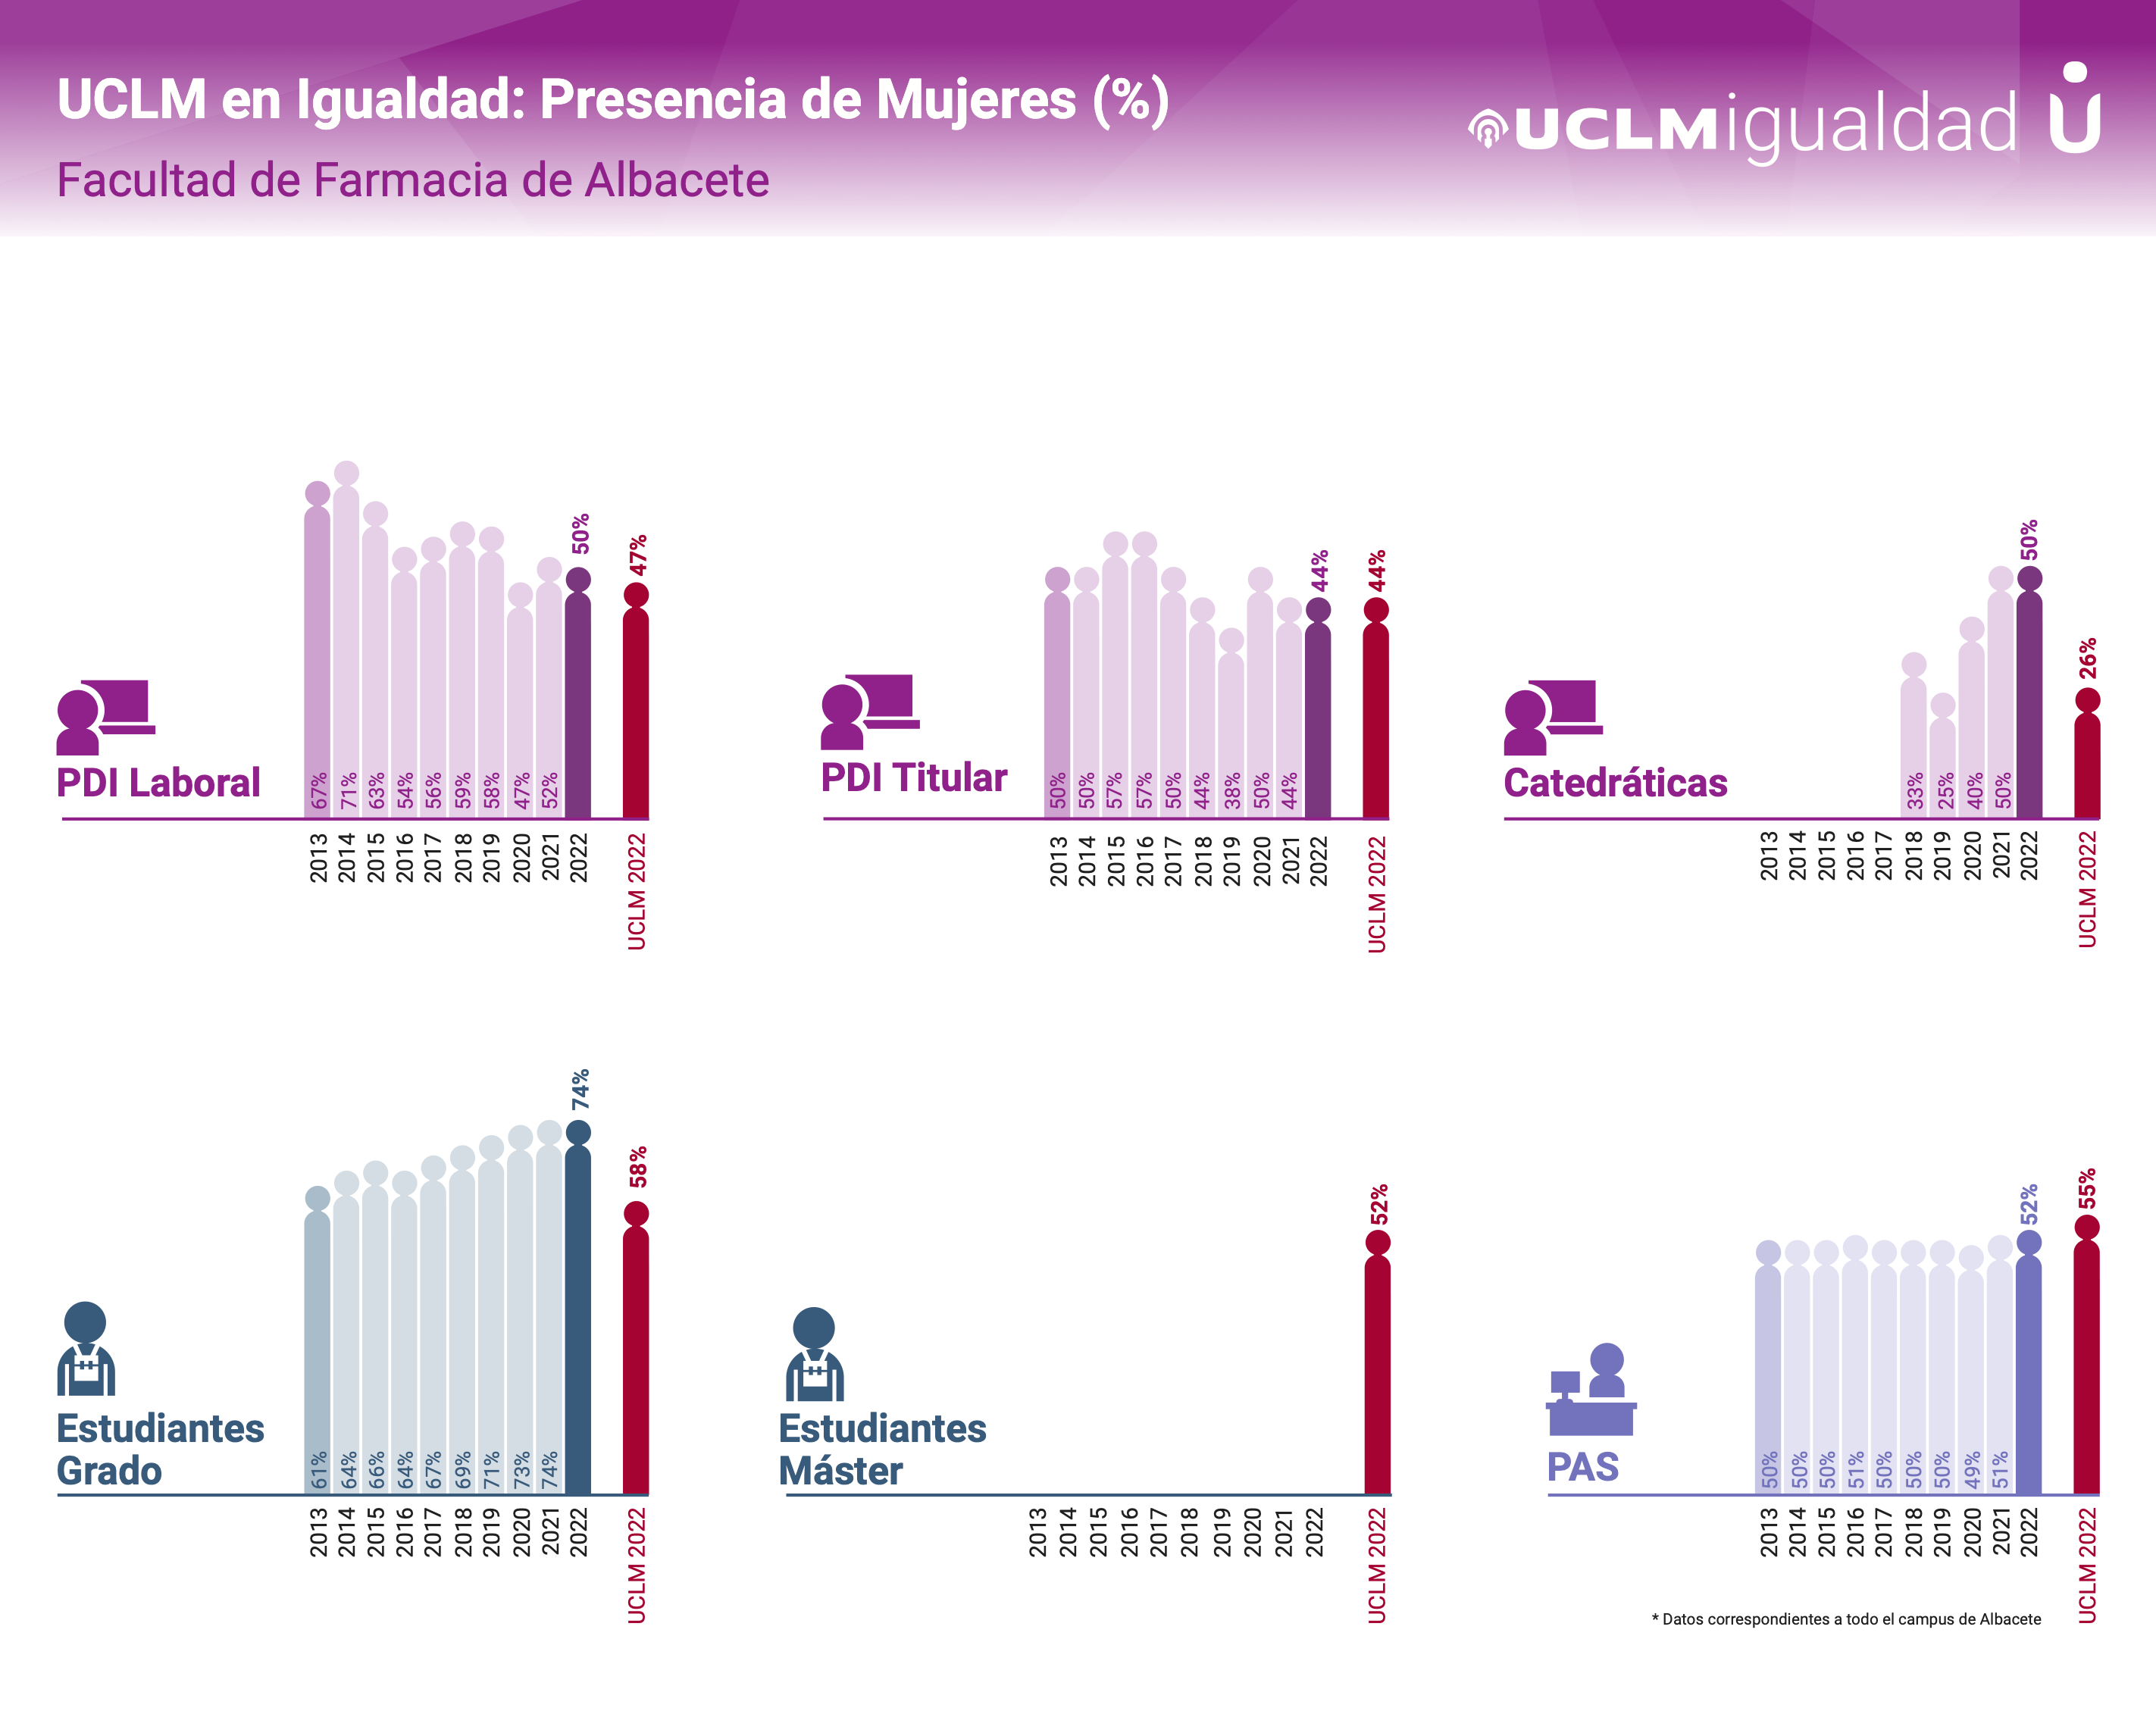 UCLM in Equality - Pharmacy 2023